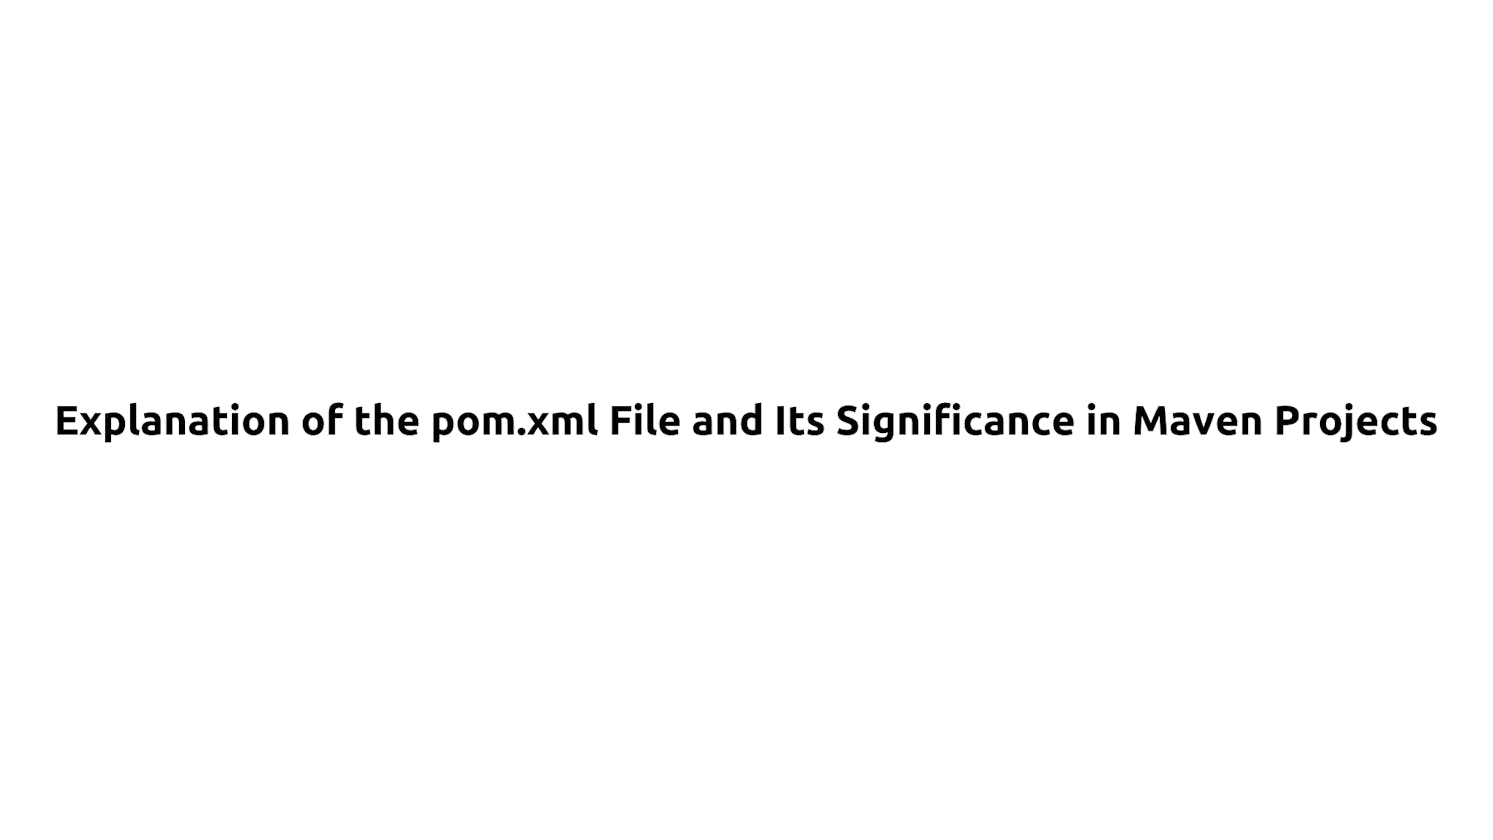 Explanation of the pom.xml File and Its Significance in Maven Projects